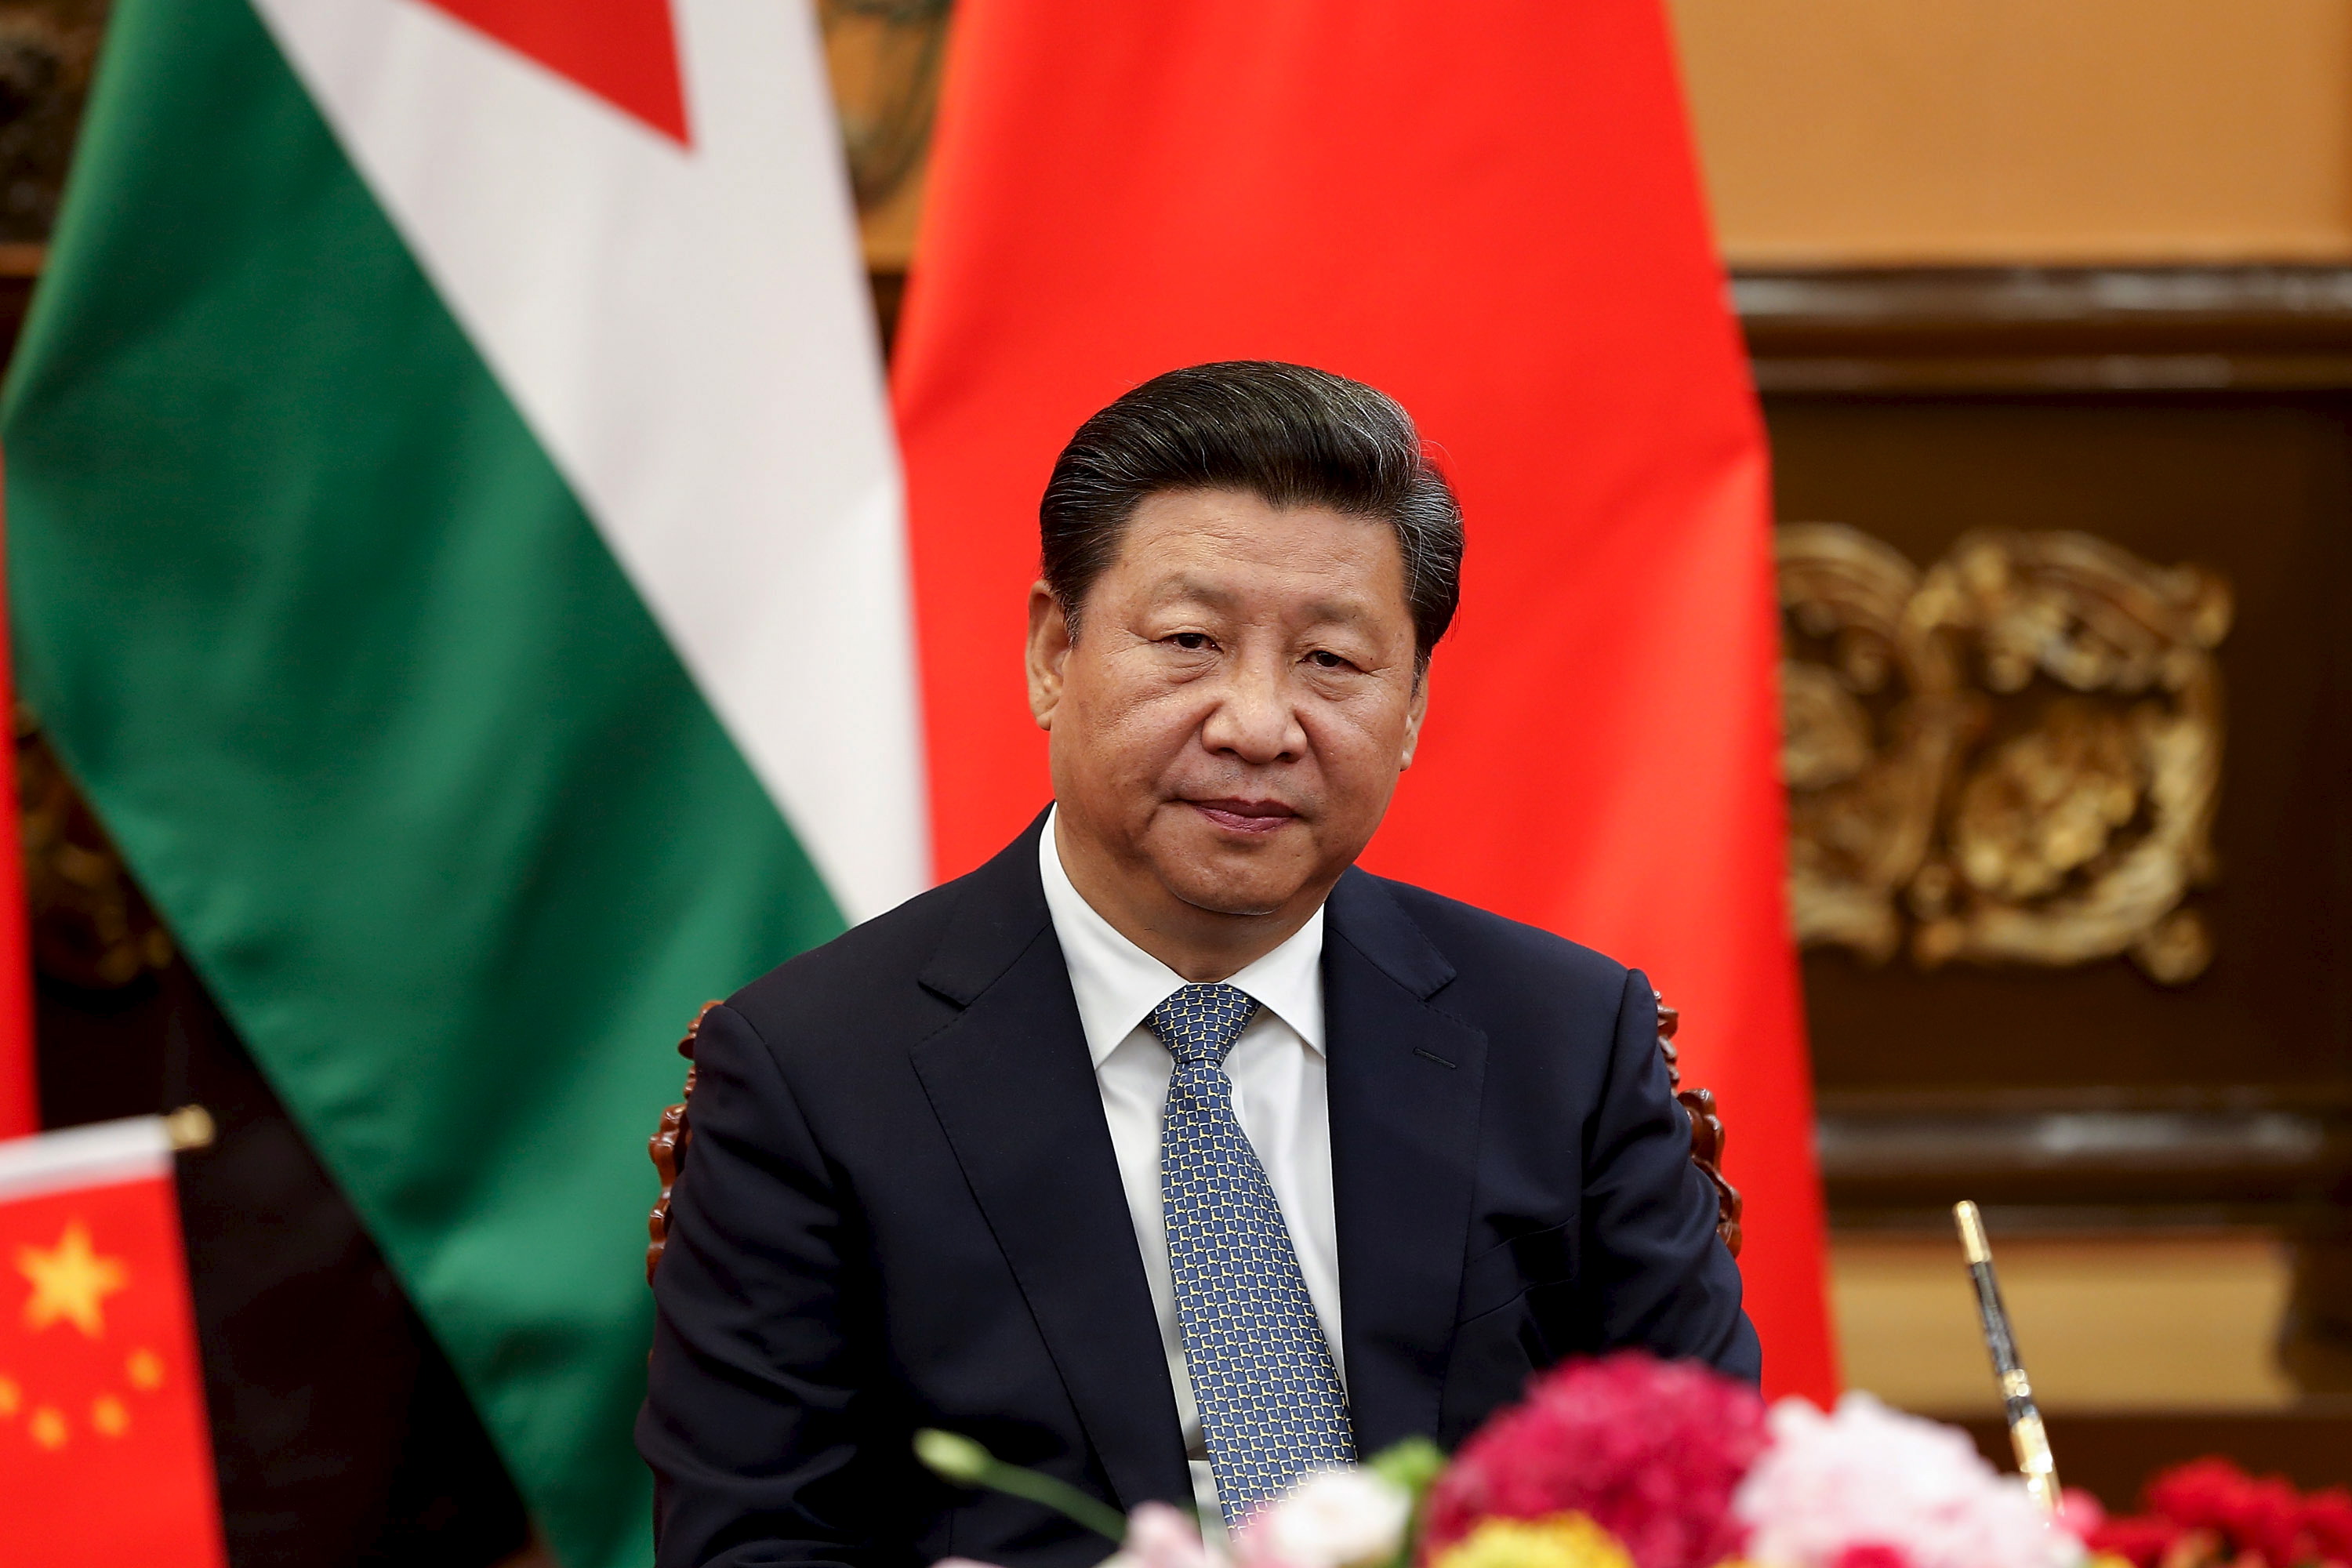 China's President Xi attends a signing ceremony with King of Jordan Abdullah II at The Great Hall Of The People in Beijing